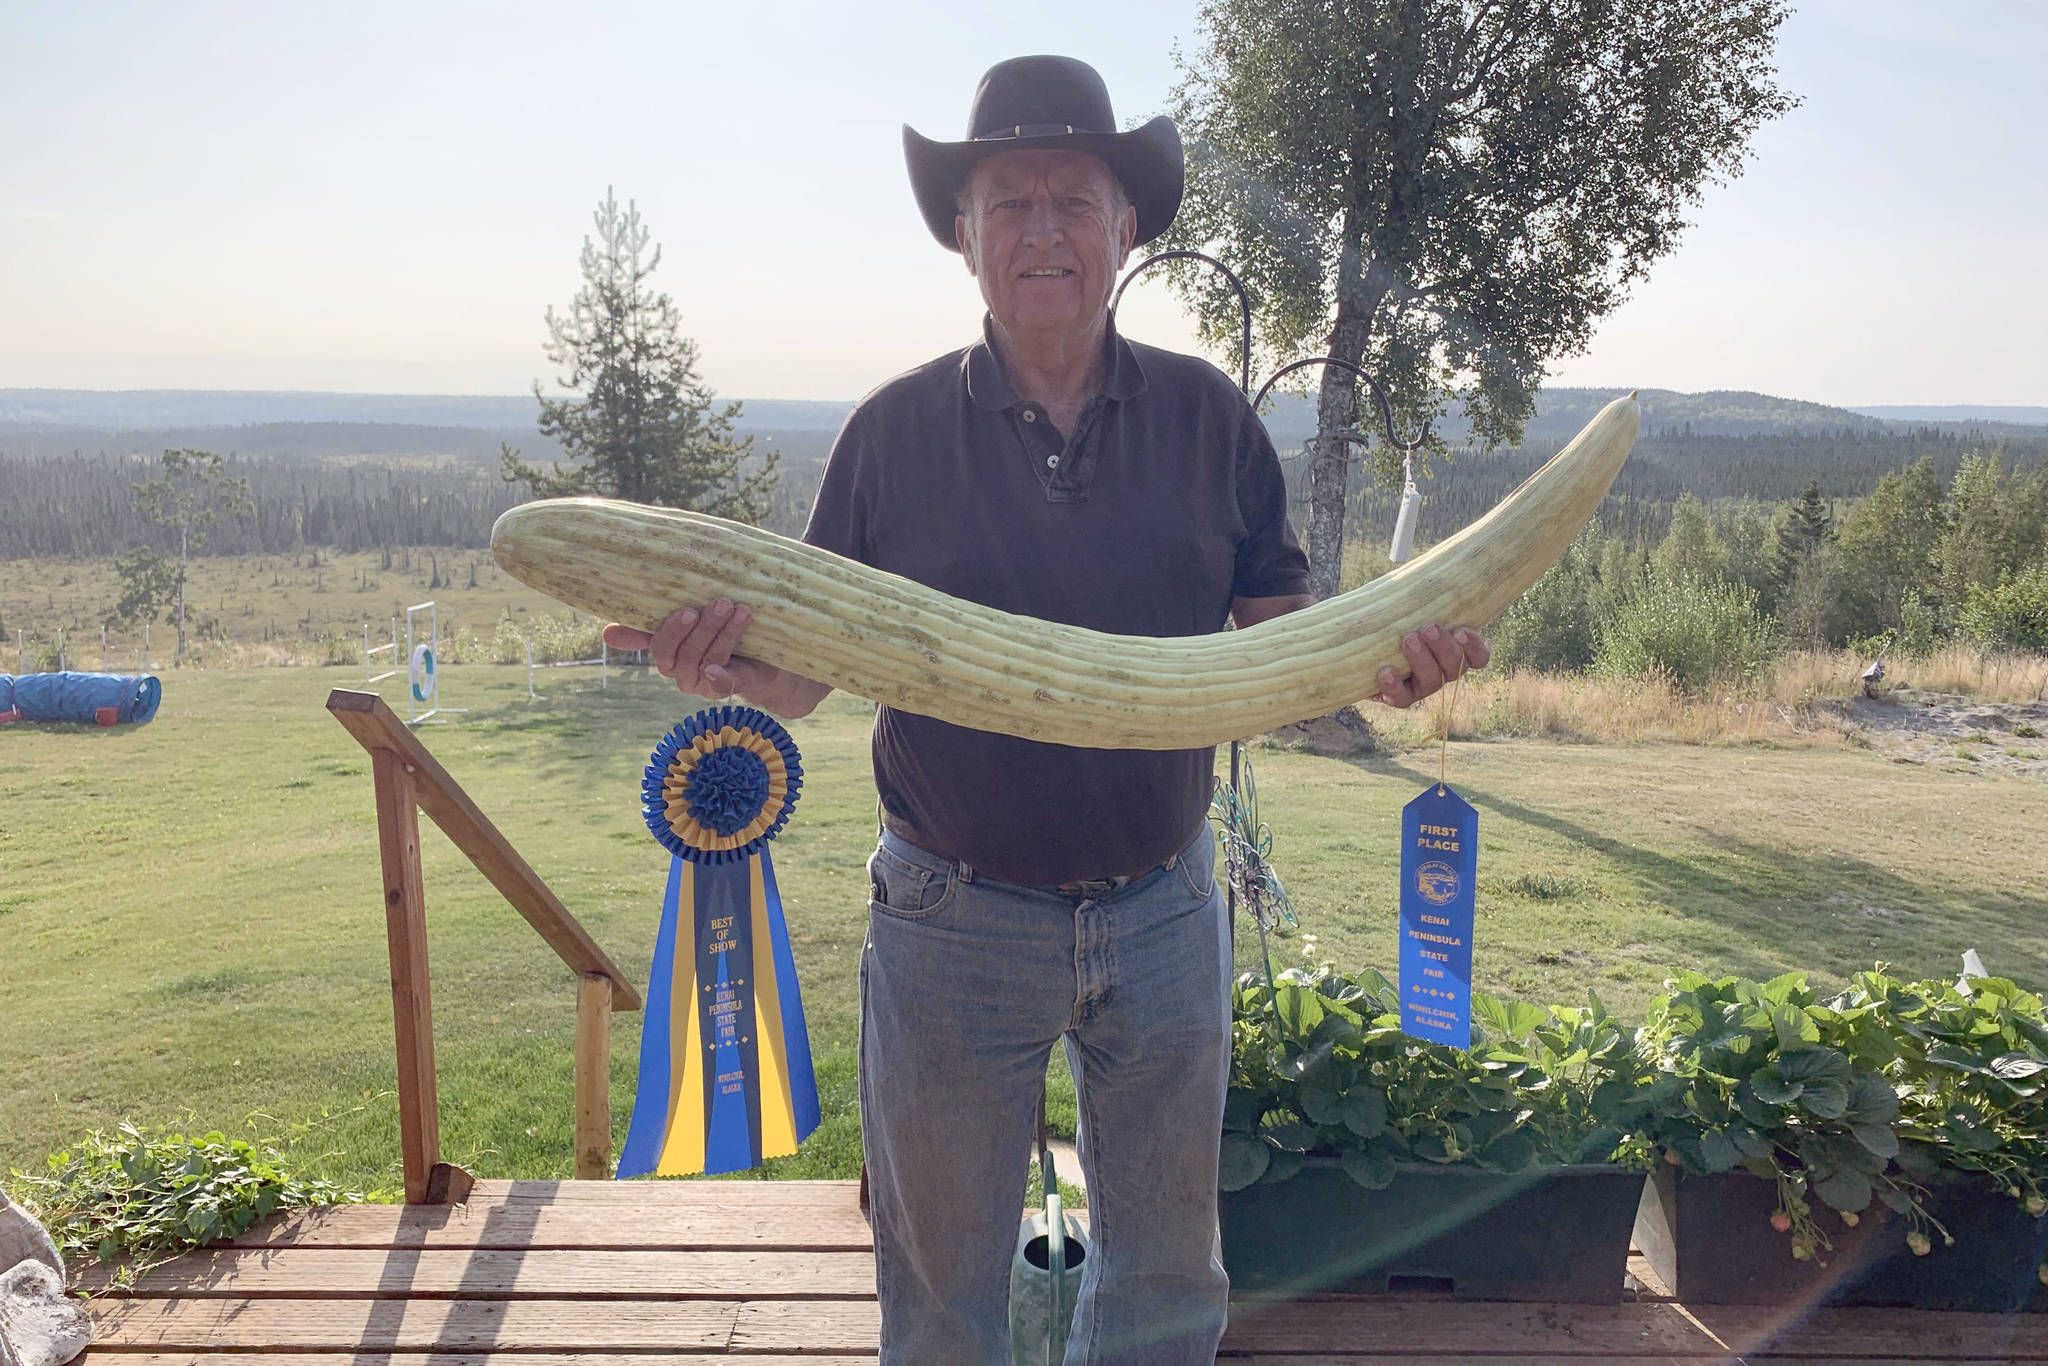 Soldotna, Alaska, resident Richard Link and his prize-winning Armenian cucumber are seen here in this August 2019 photo. The 14-pound, 37 3/8-inch cucumber took home grand prize at the 2019 Alaska State Fair. (Courtesy Ludy Link)